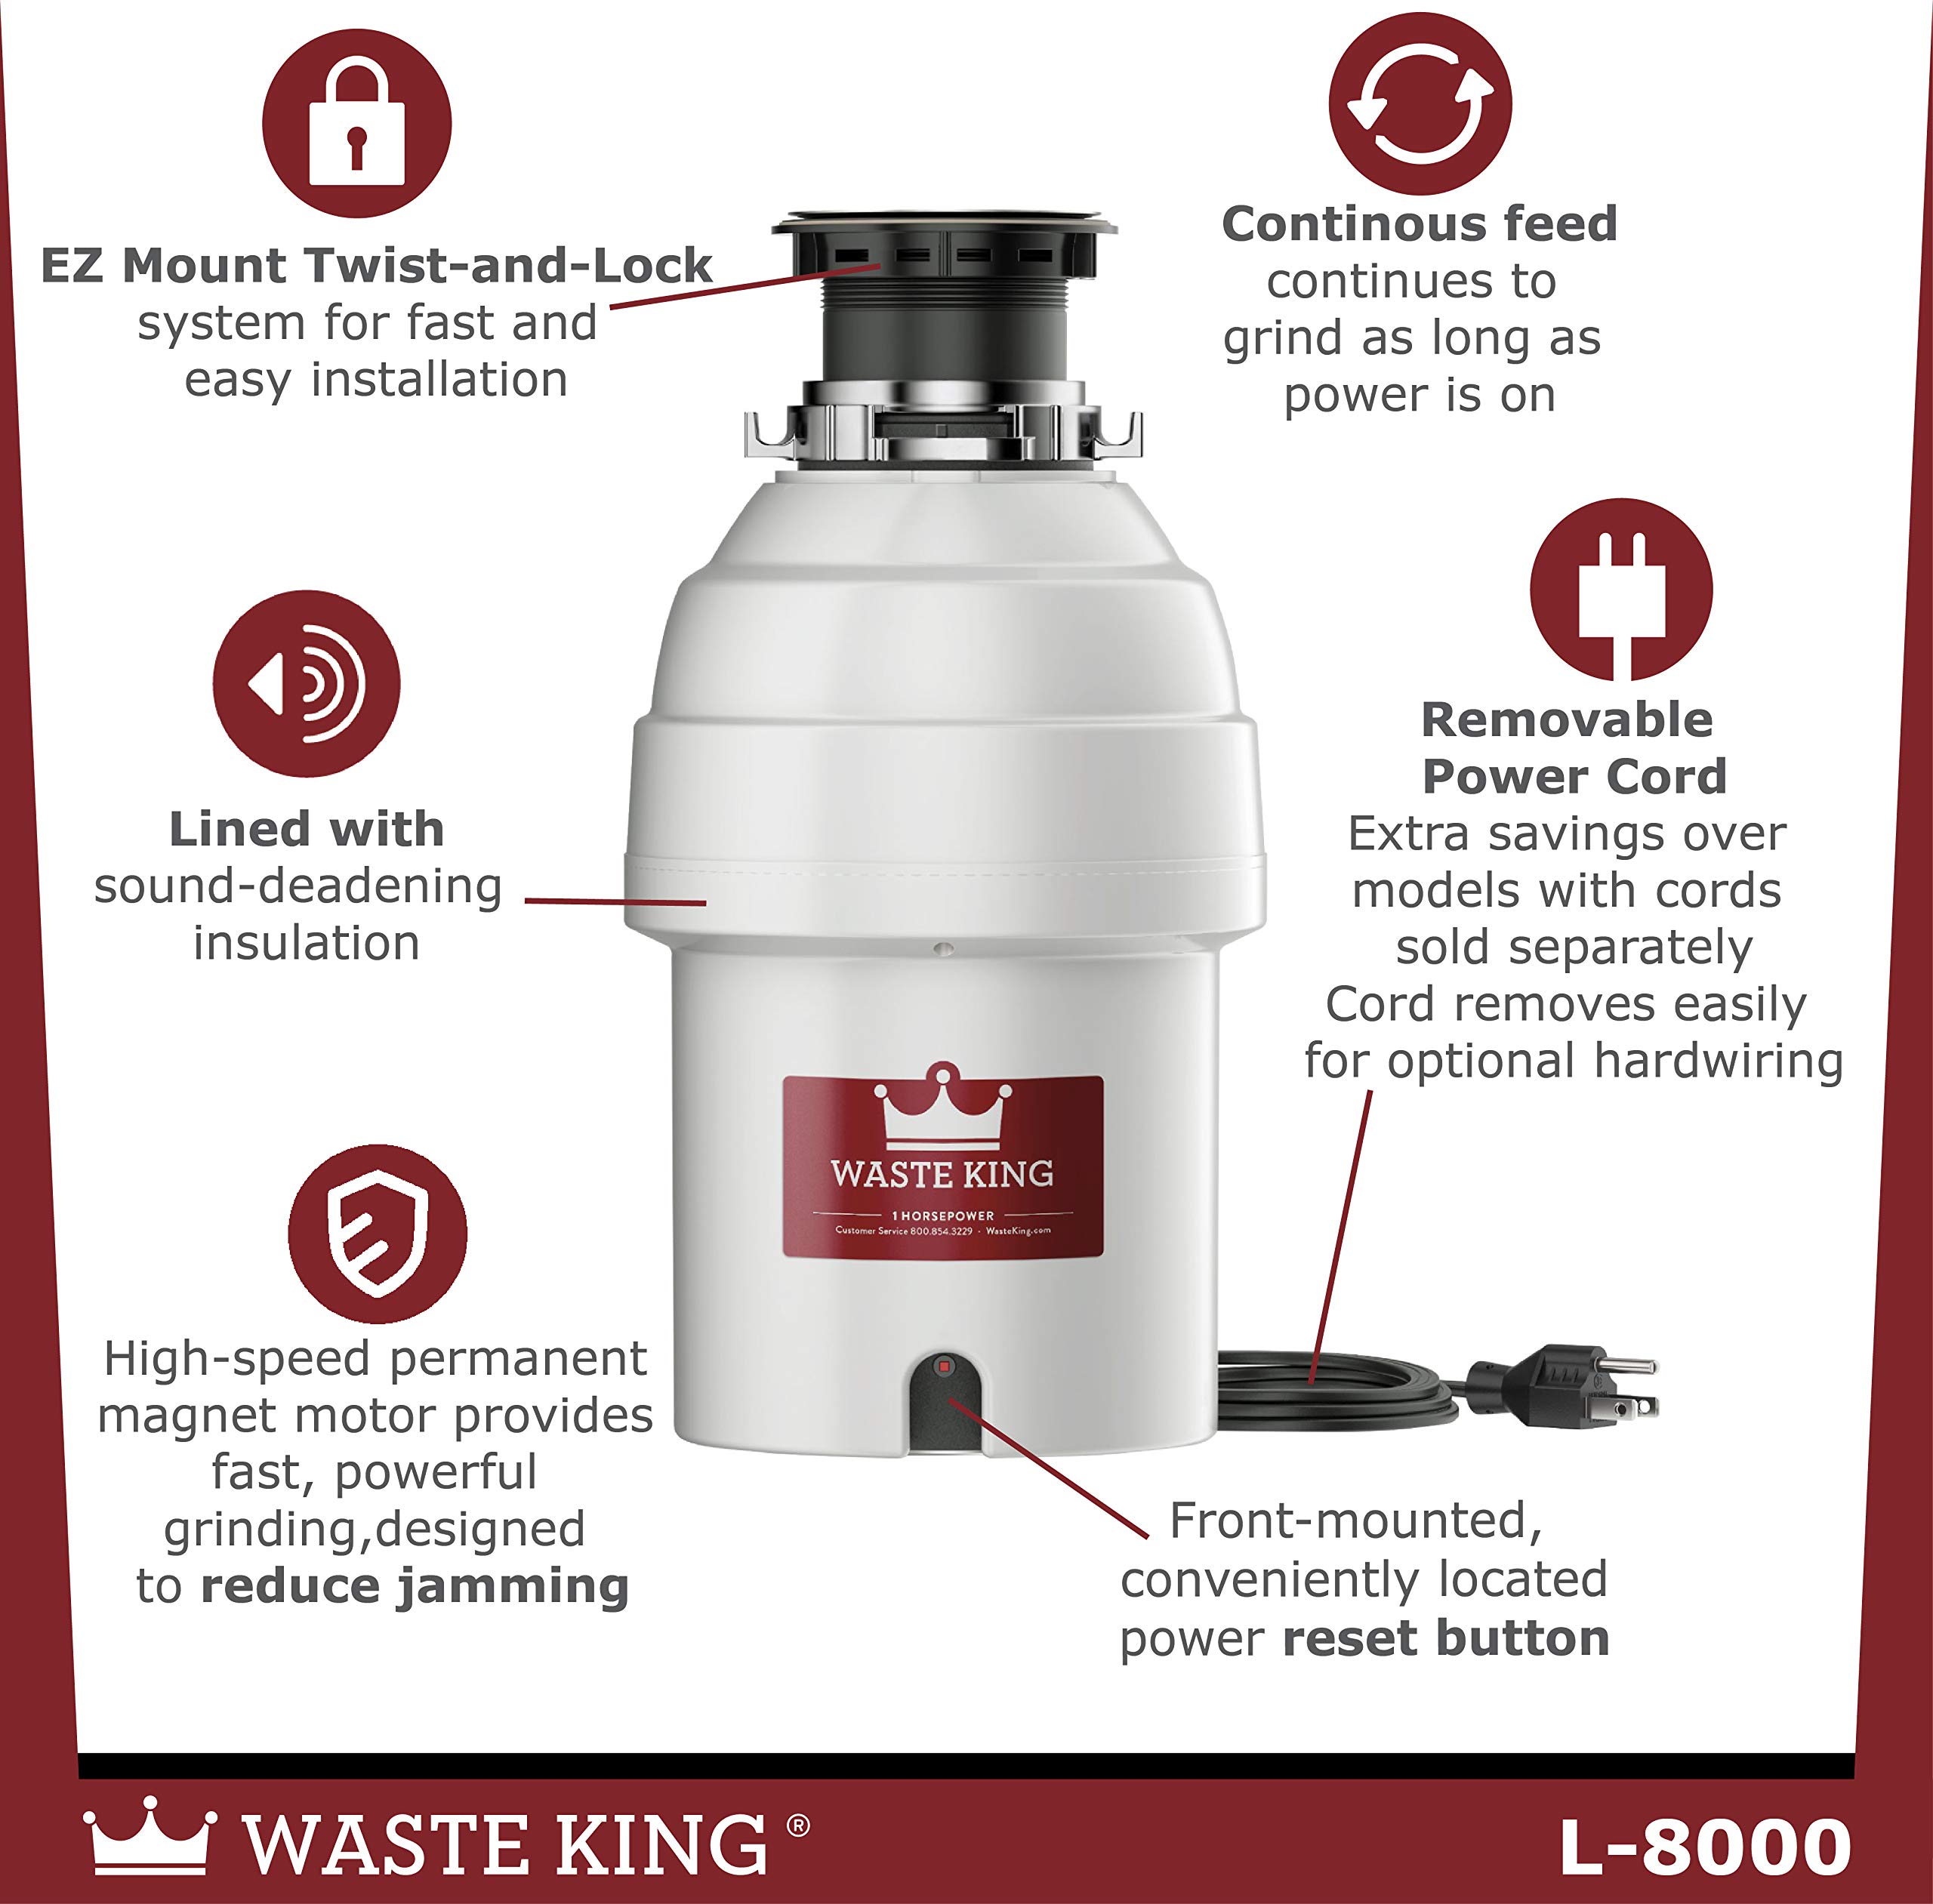 Waste King 1 HP Garbage Disposal with Power Cord, Food Waste Disposer for Kitchen Sink, L-8000